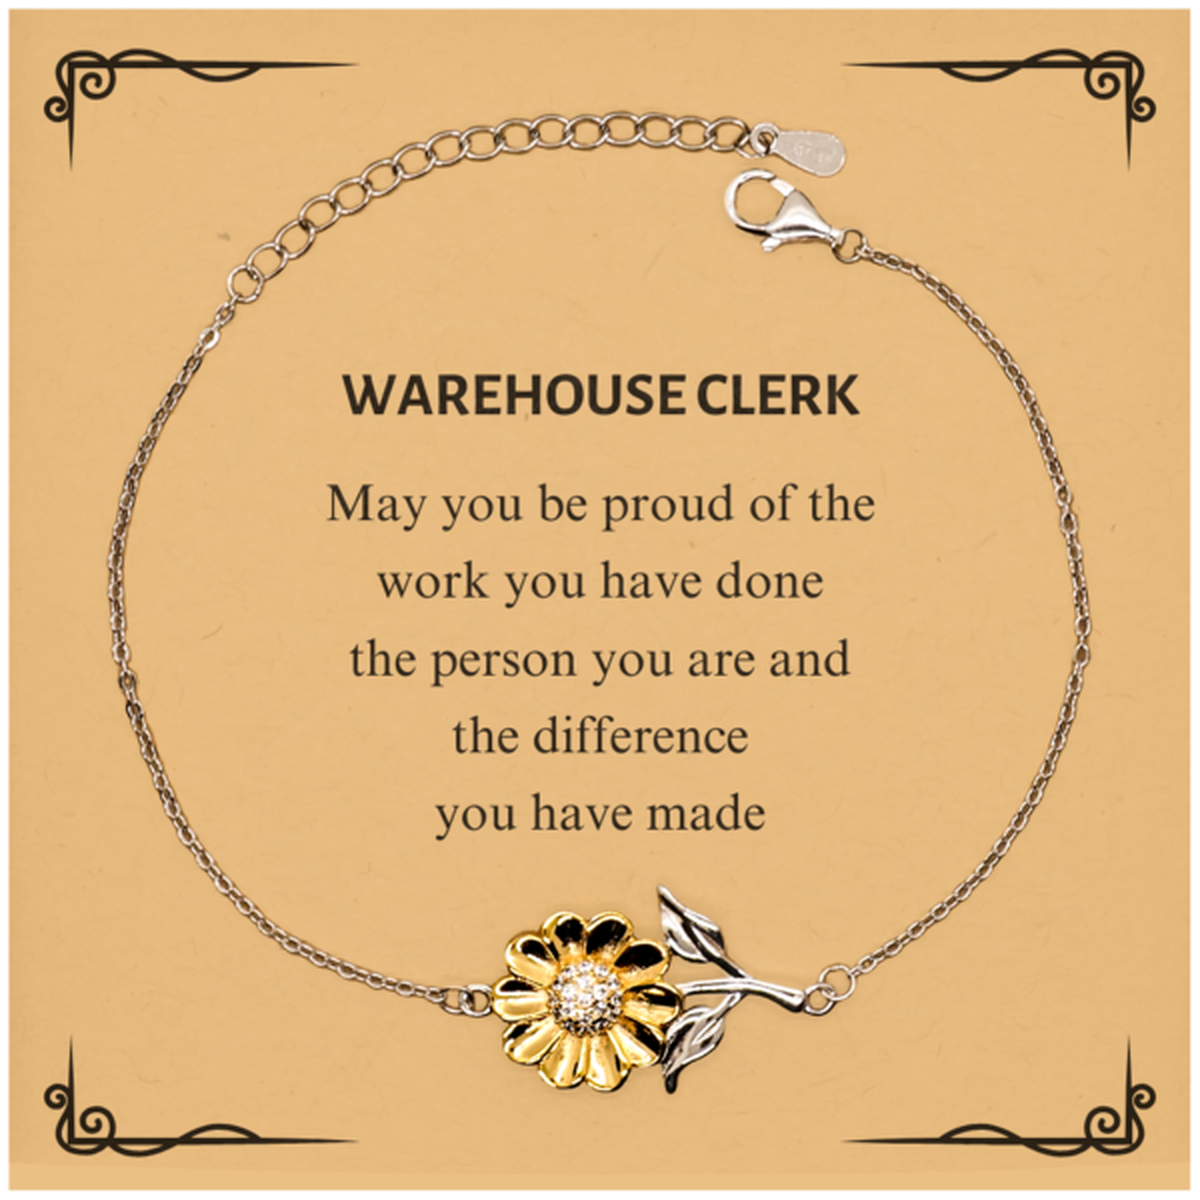 Warehouse Clerk May you be proud of the work you have done, Retirement Warehouse Clerk Sunflower Bracelet for Colleague Appreciation Gifts Amazing for Warehouse Clerk